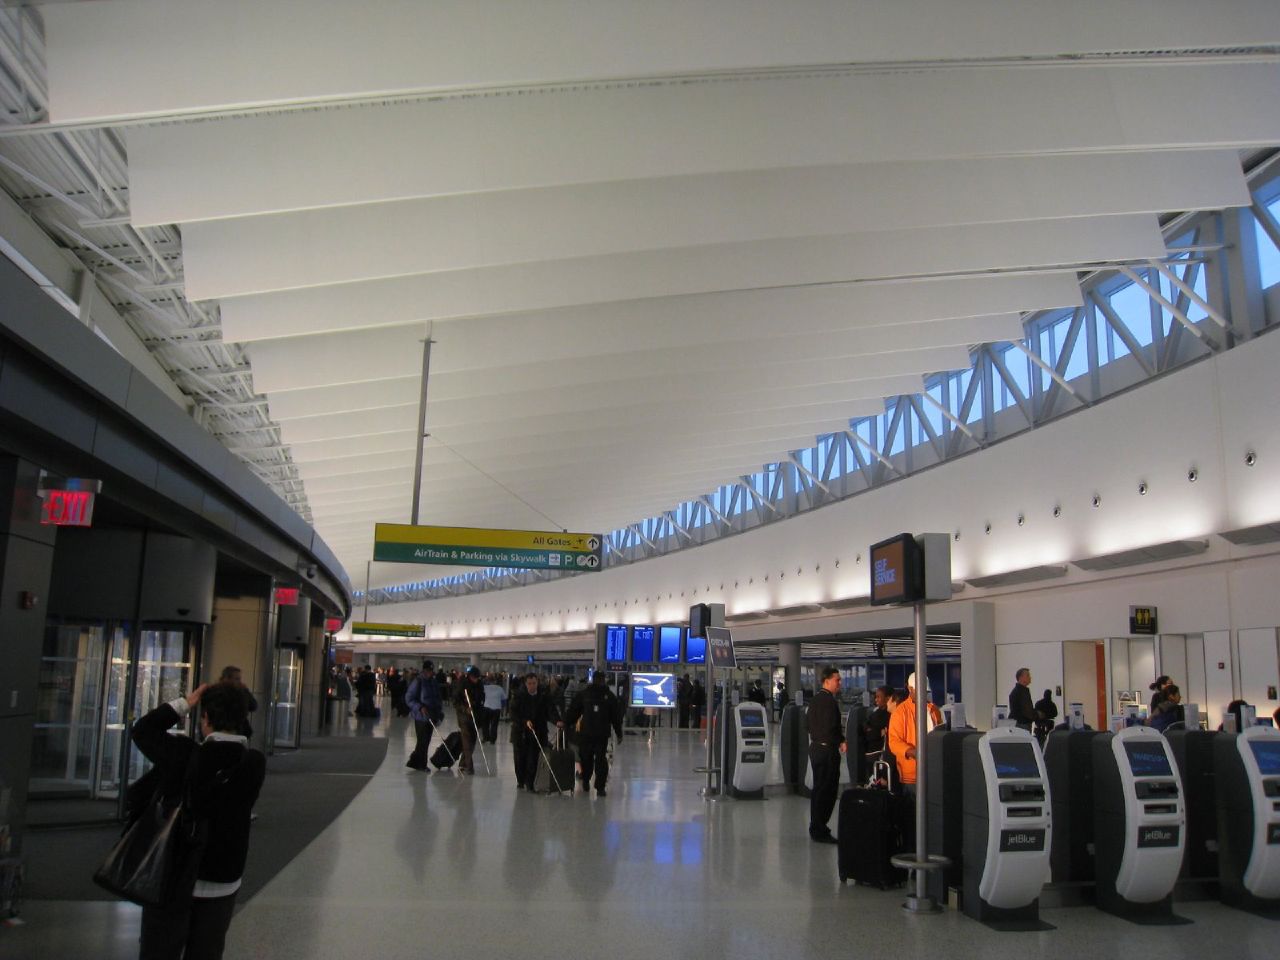 people walk along an airport concourse in the evening